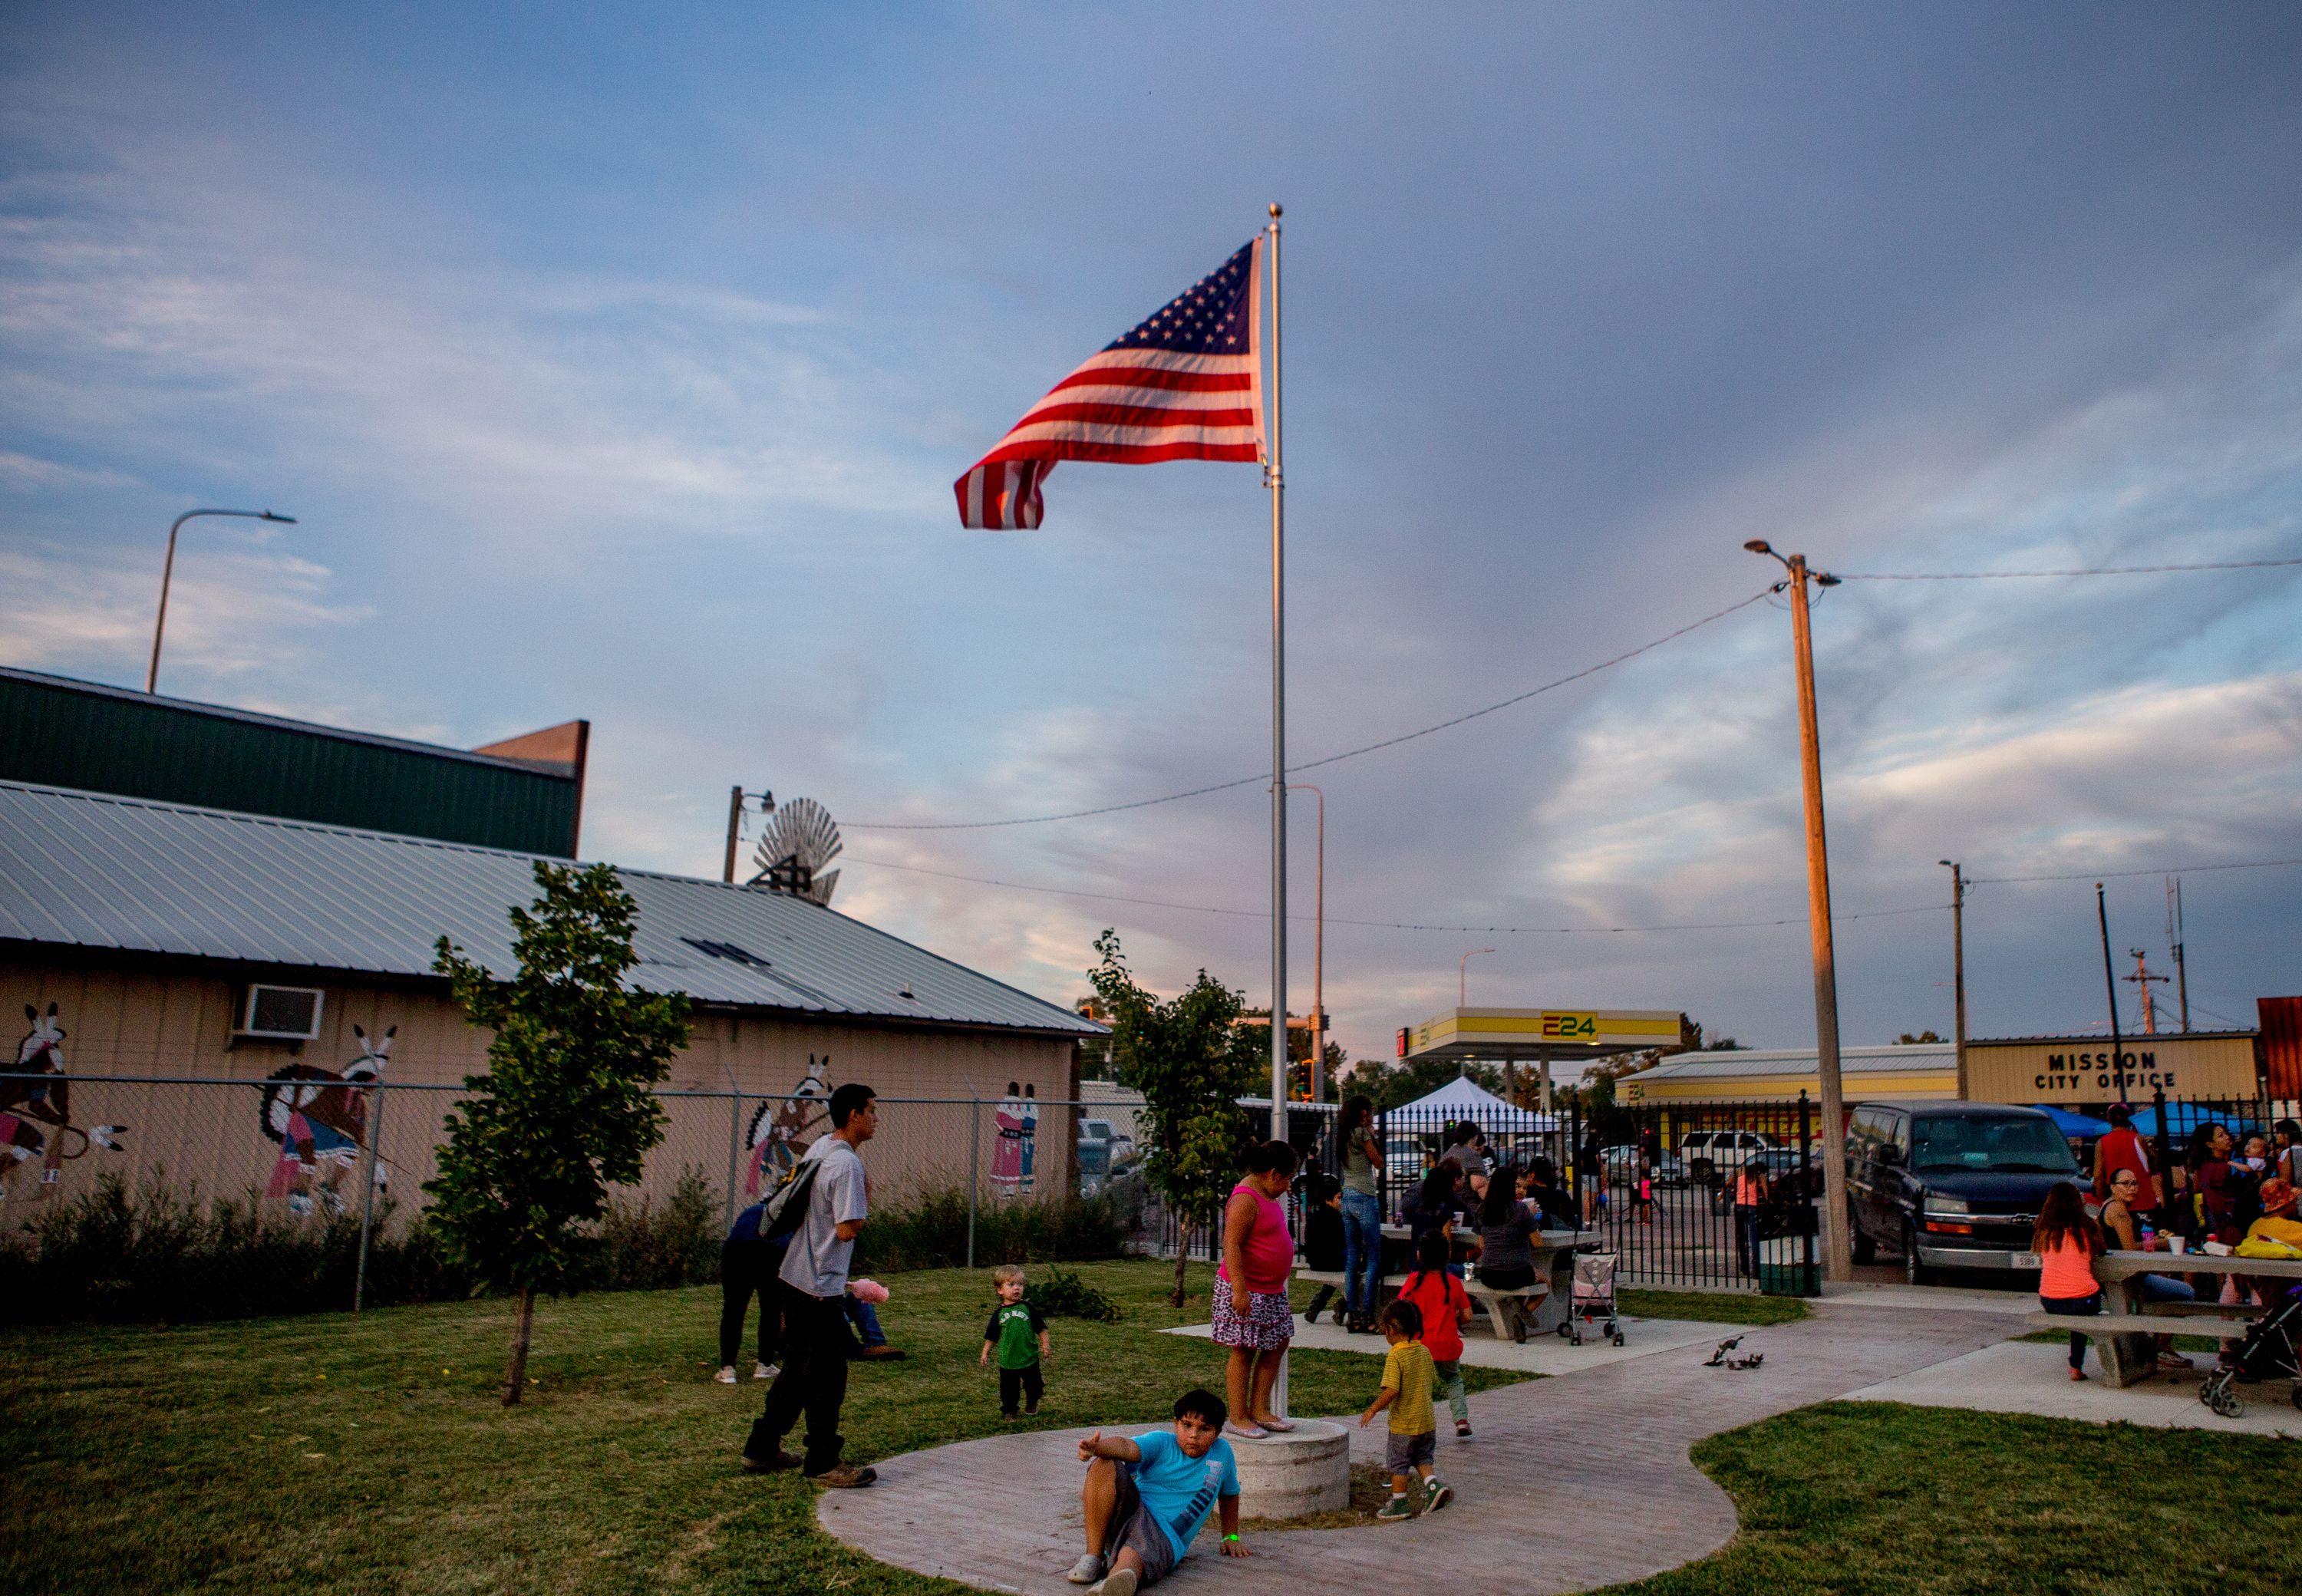 Mission residents and children relax on September 1, 2018, during the first annual Sicangu Youth Program "Back-to-School" block party in Mission, South Dakota. Image by Brian Munoz. South Dakota, 2018.